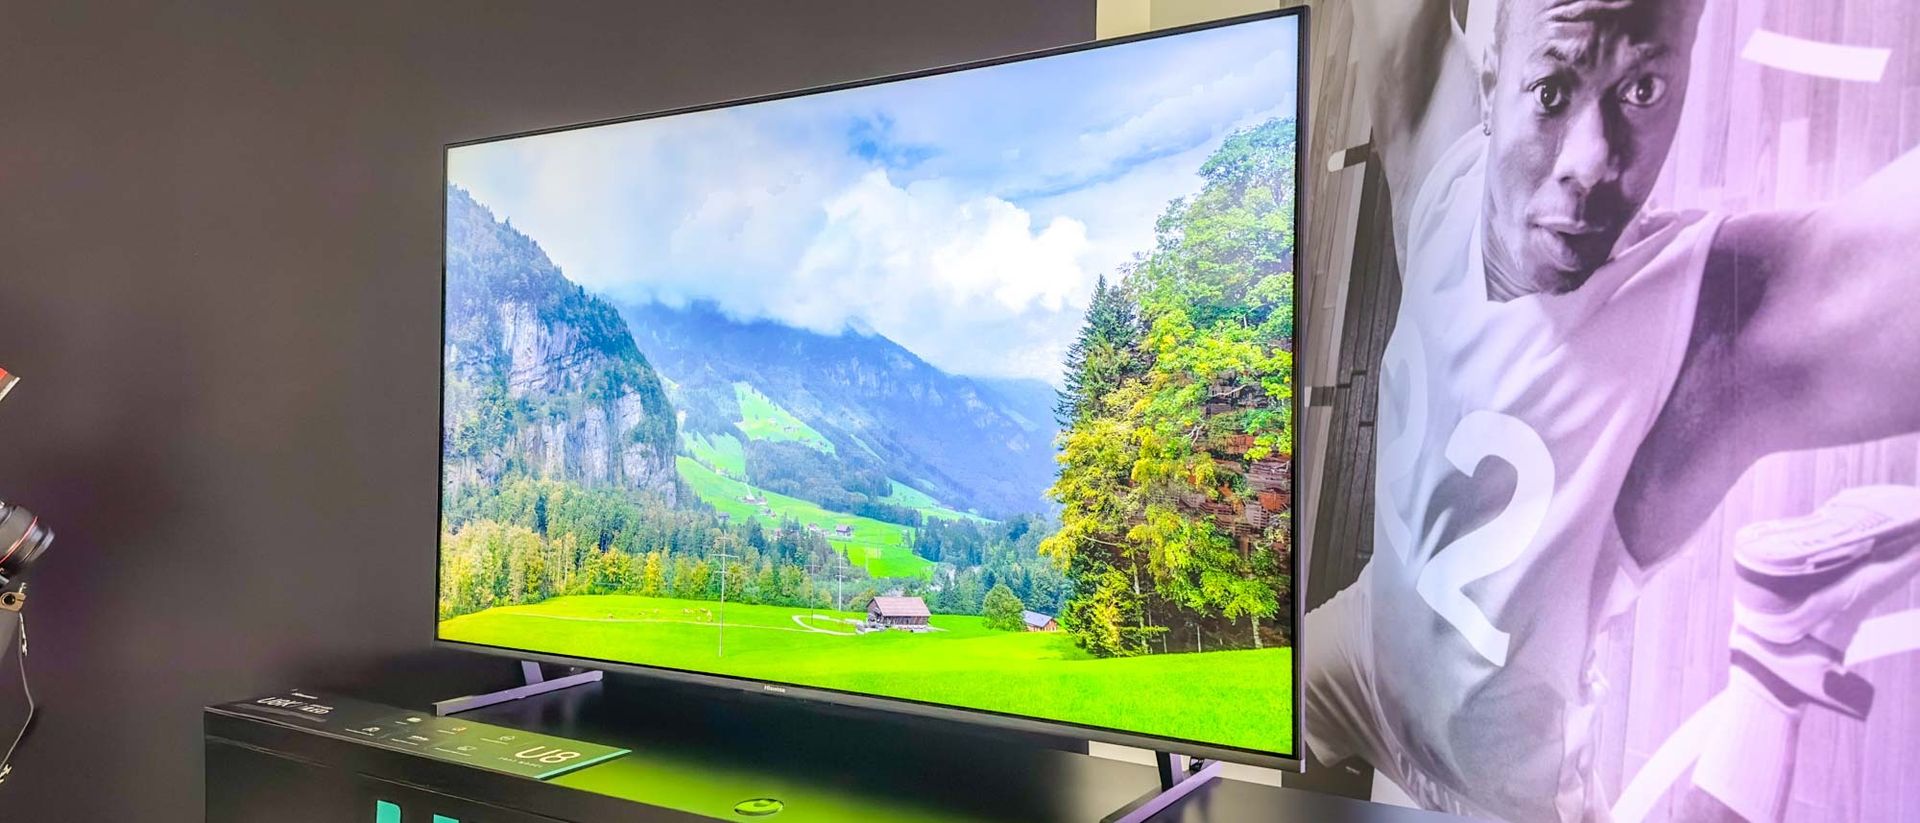 Hisense U8K Mini LED TV handson one of the best value TVs of the year? Tom's Guide